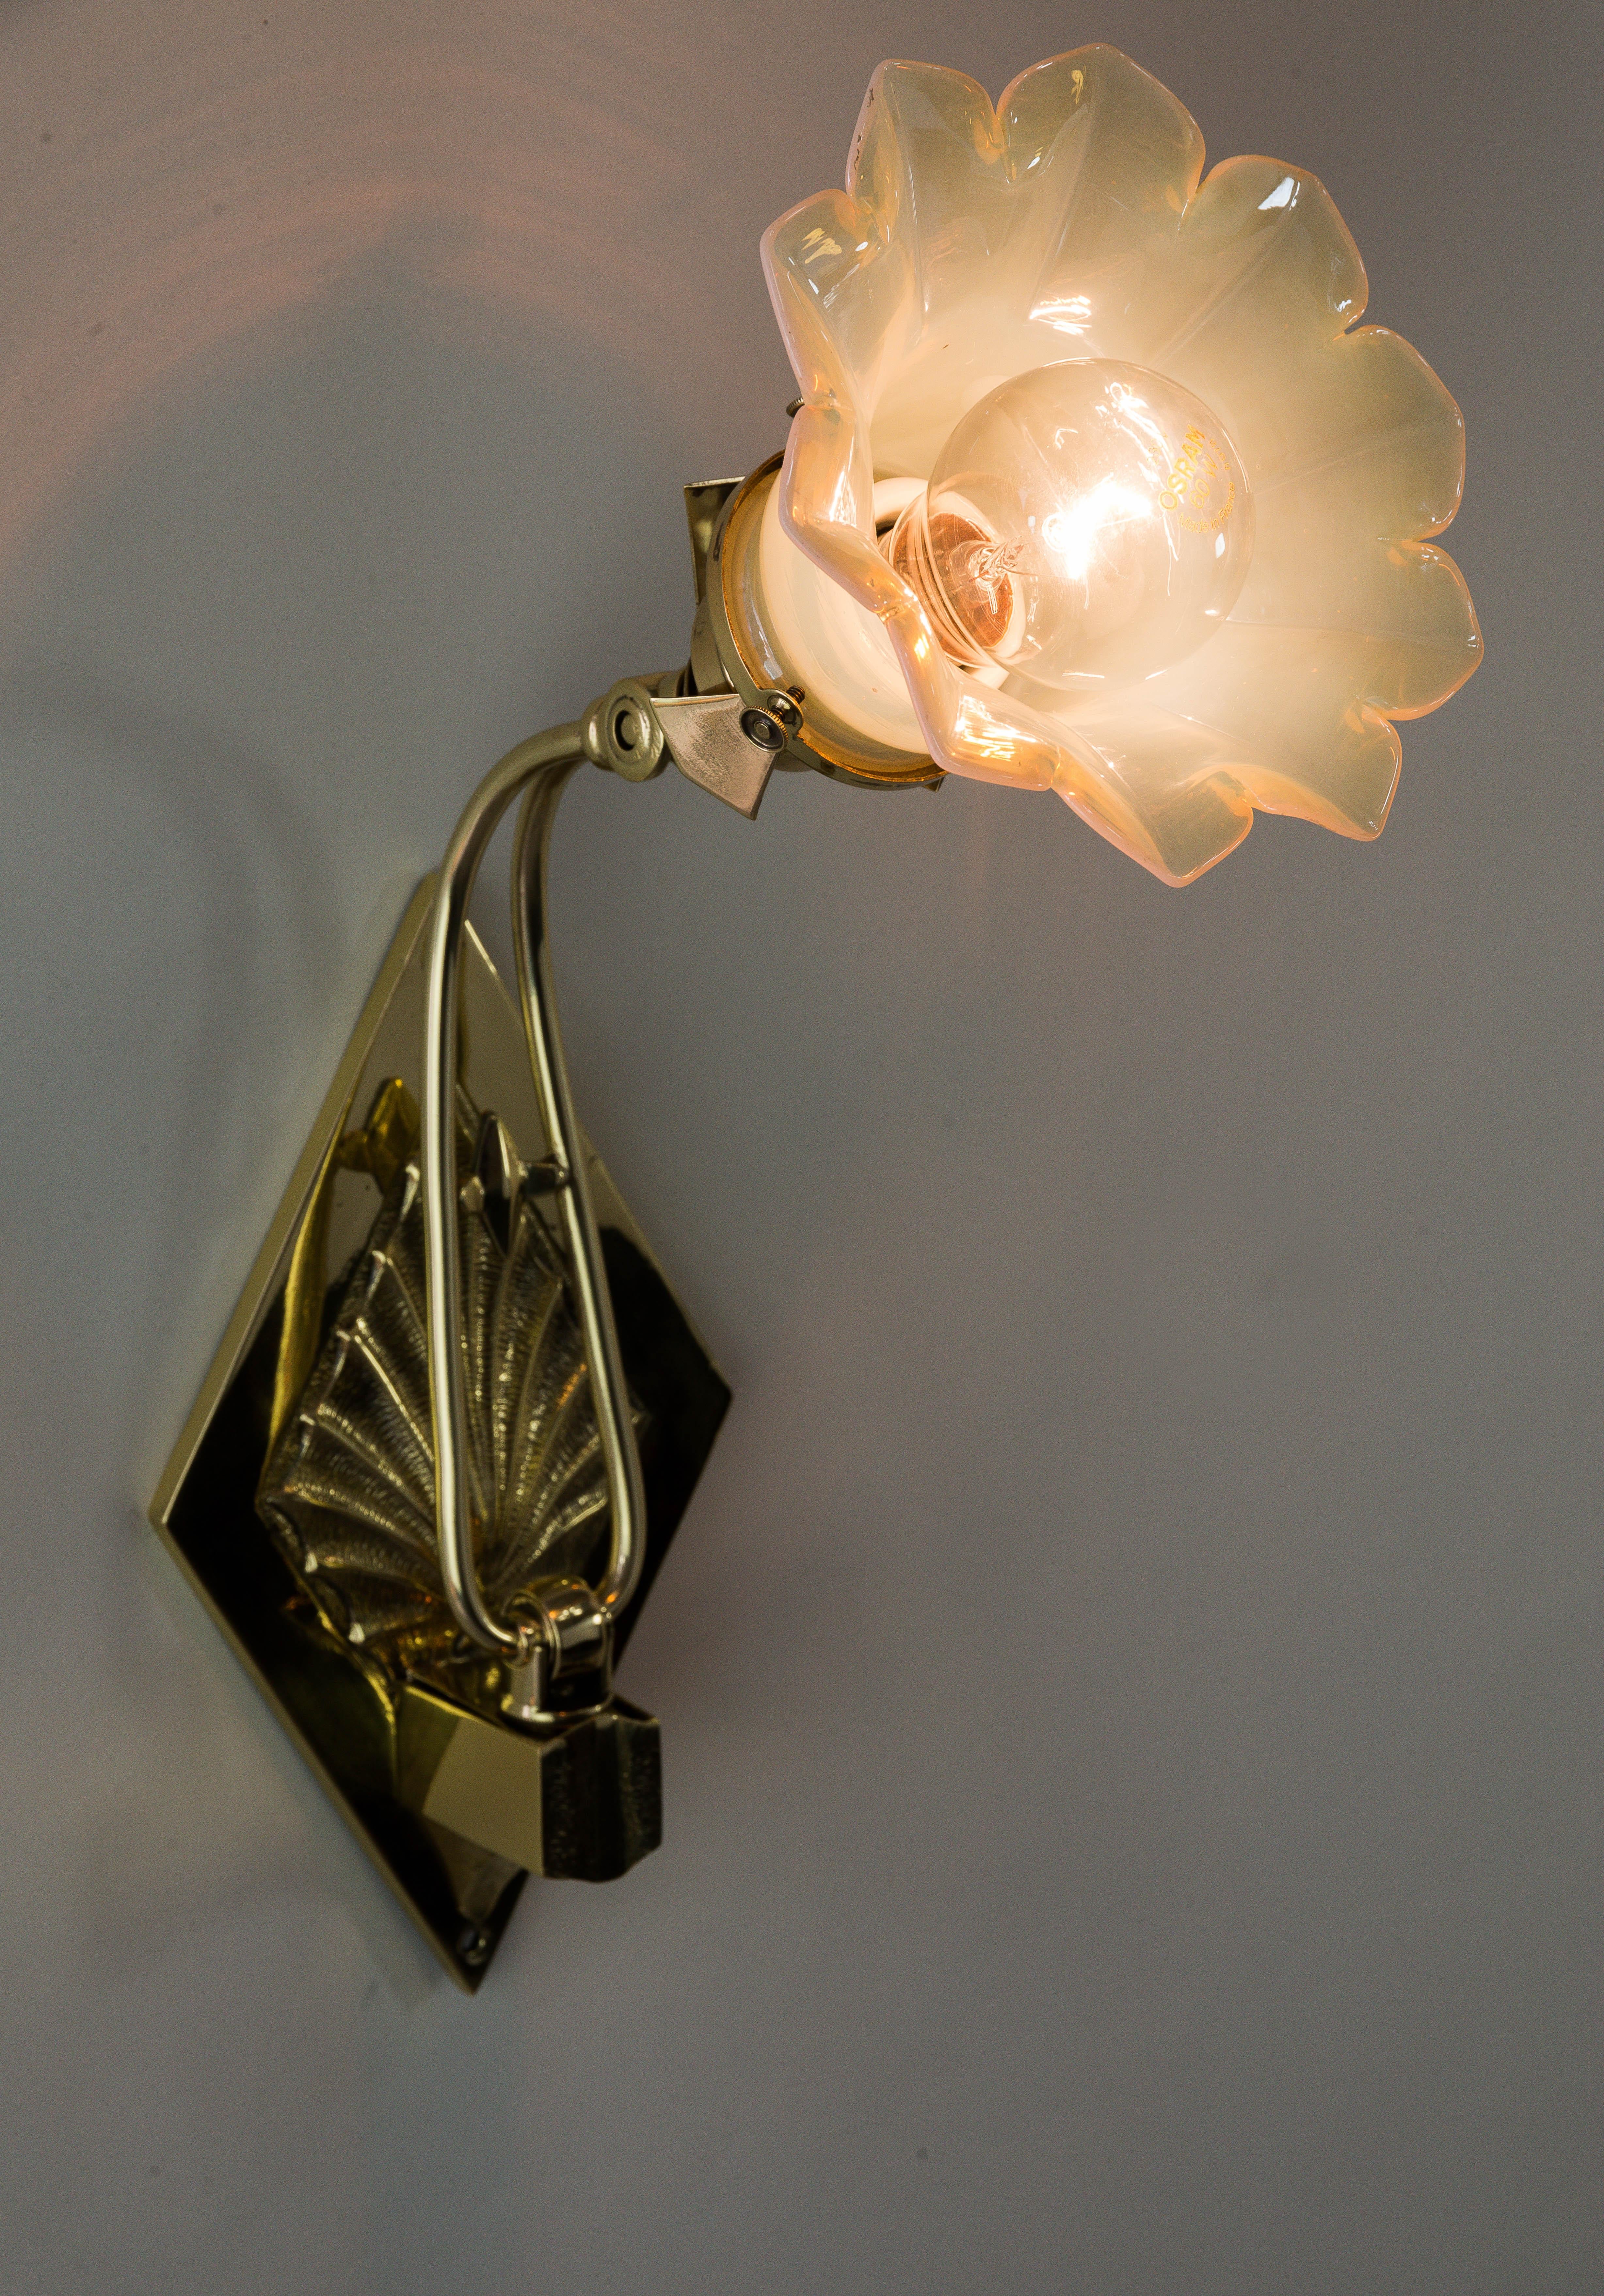 Adjustable Art Deco Wall Lamp circa 1920s with Opaline Glass Shade 12